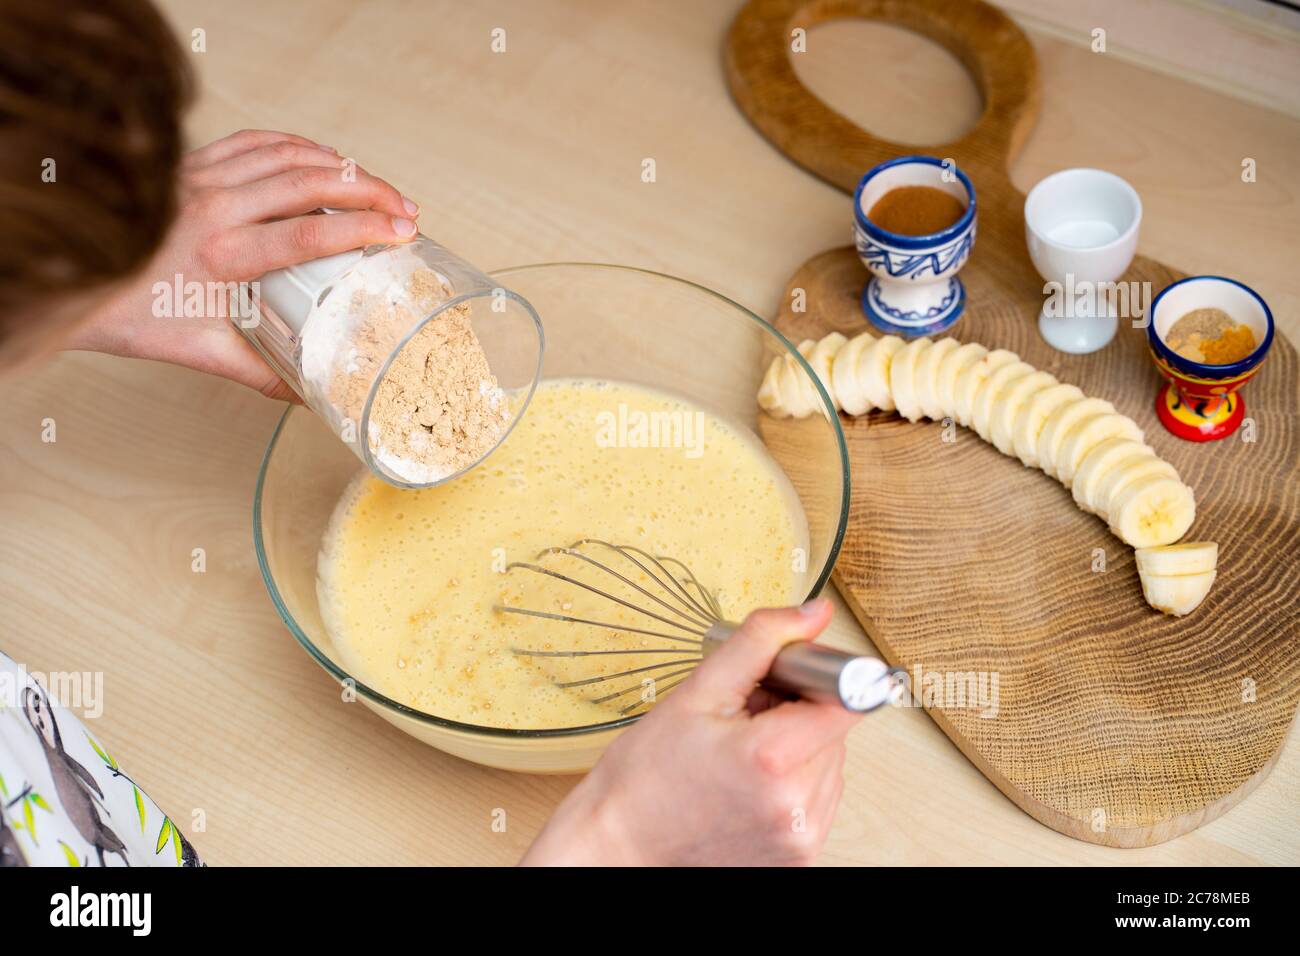 Young girl is holding a glass with flour and preparing, easy to make and healthy, home made banana bread. Stock Photo